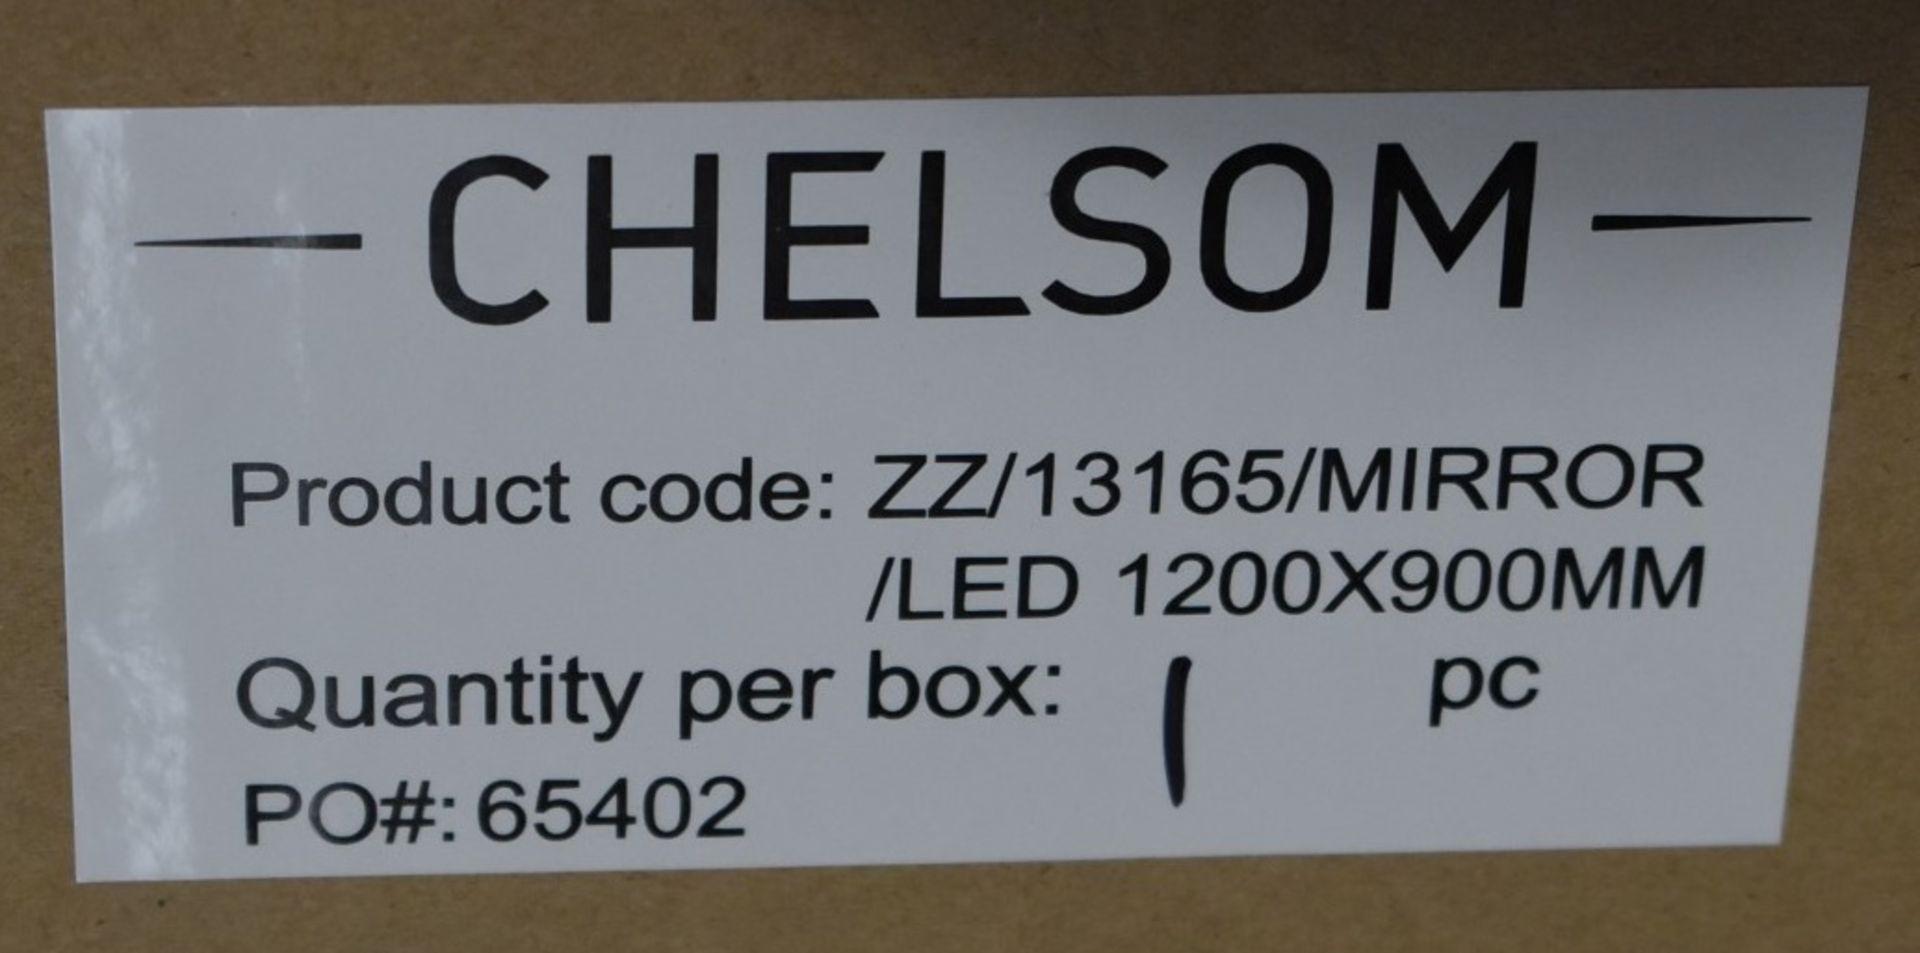 1 x Chelsom Large Illuminated LED Bathroom Mirror With Demister - Brand New Stock - As Used in Major - Image 4 of 10